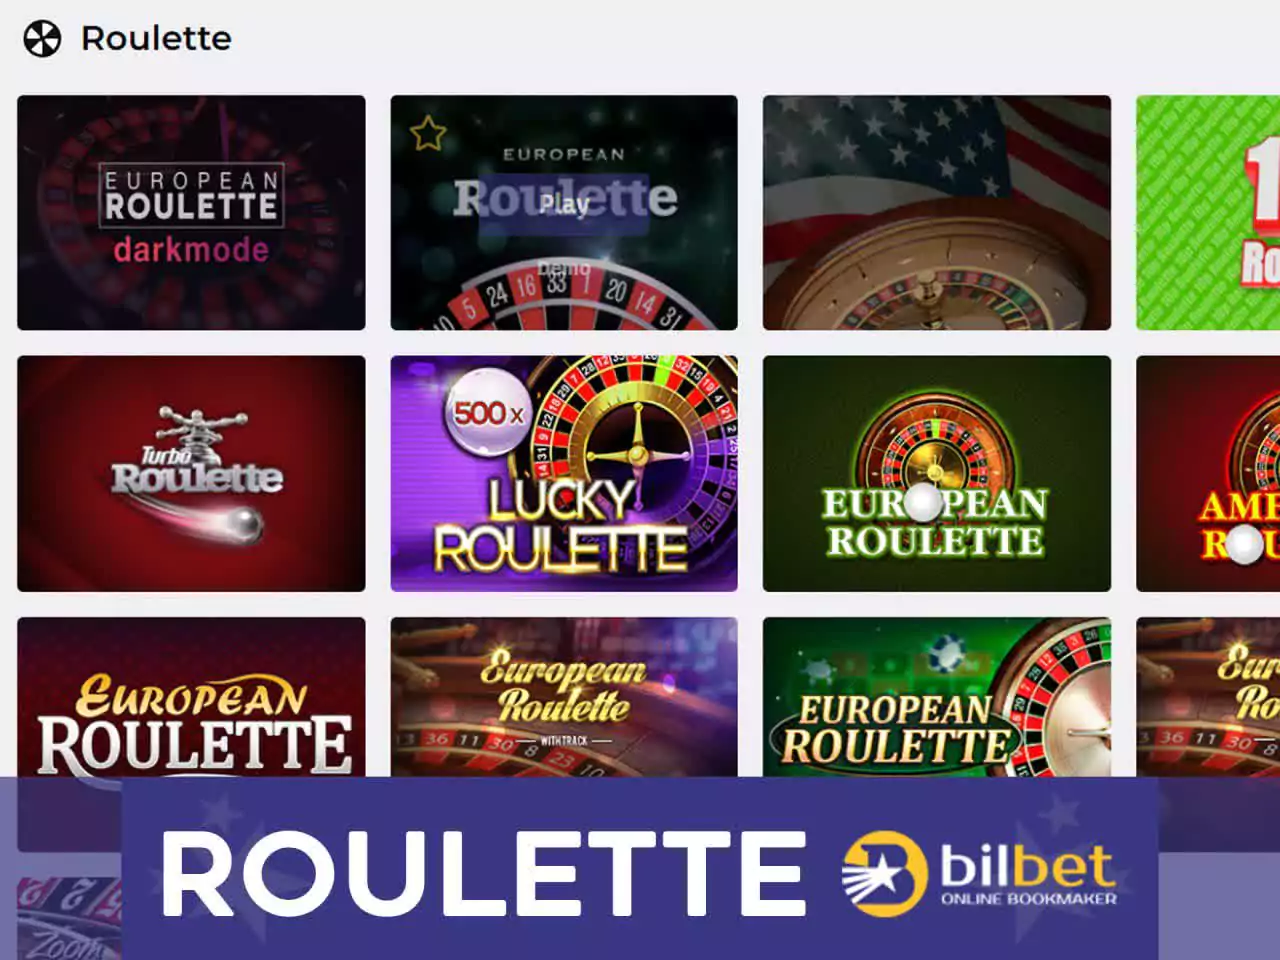 Play european and other types of roulette.